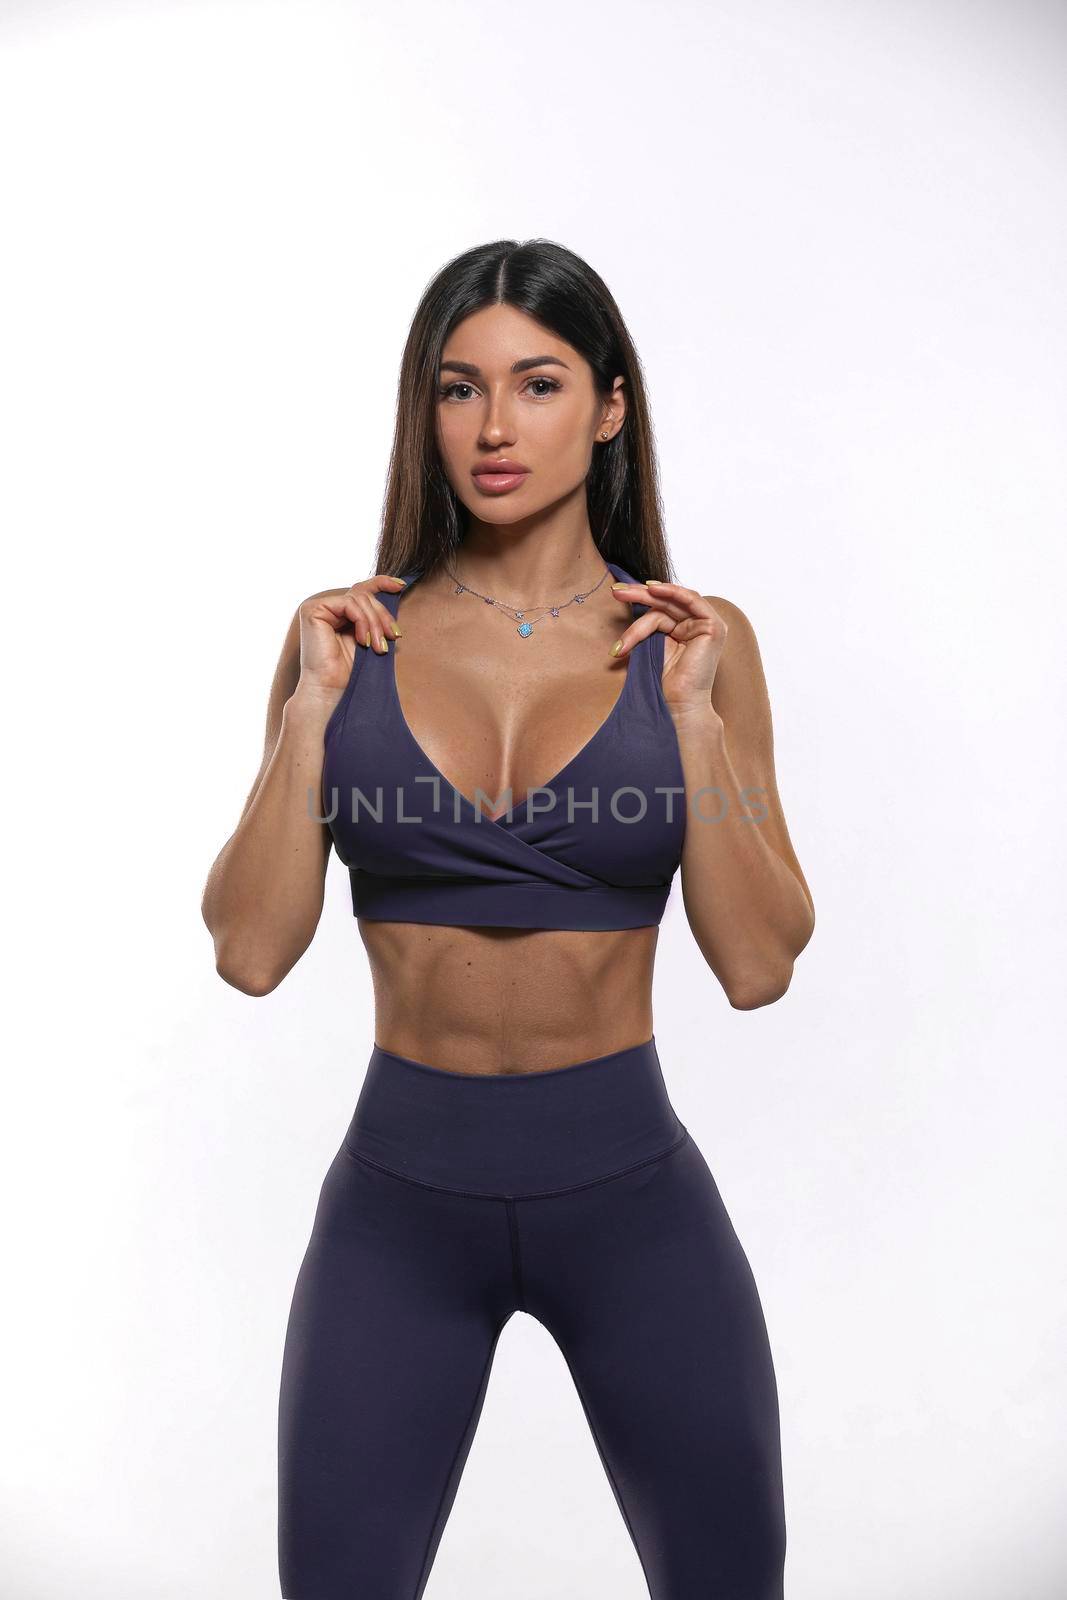 girl in purple leggings and top on a white background by but_photo